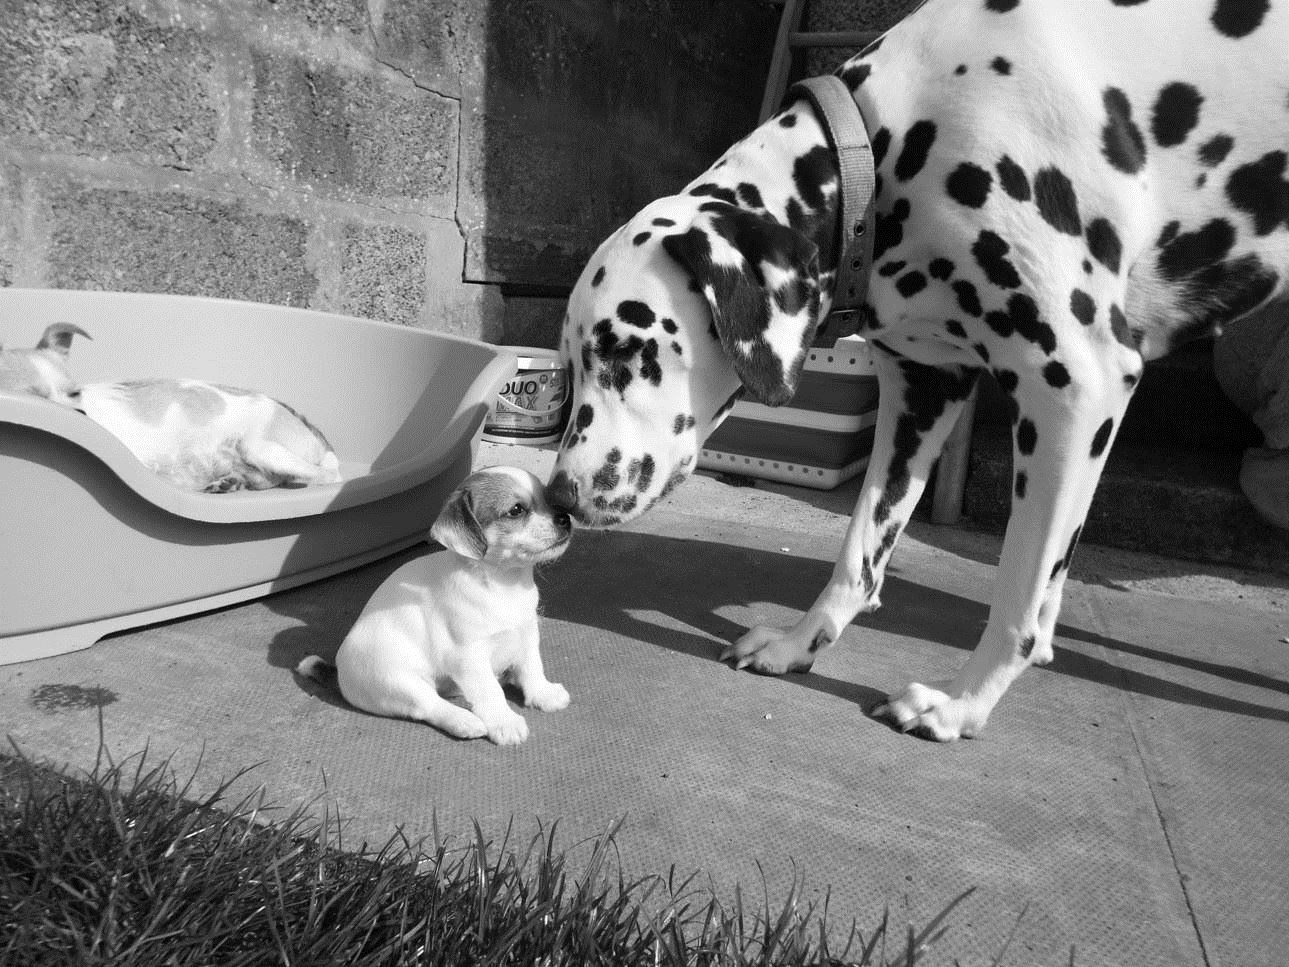 Dalmation Nova, meeting Sweet Pea for the first time. Owner Roddy MacKenzie